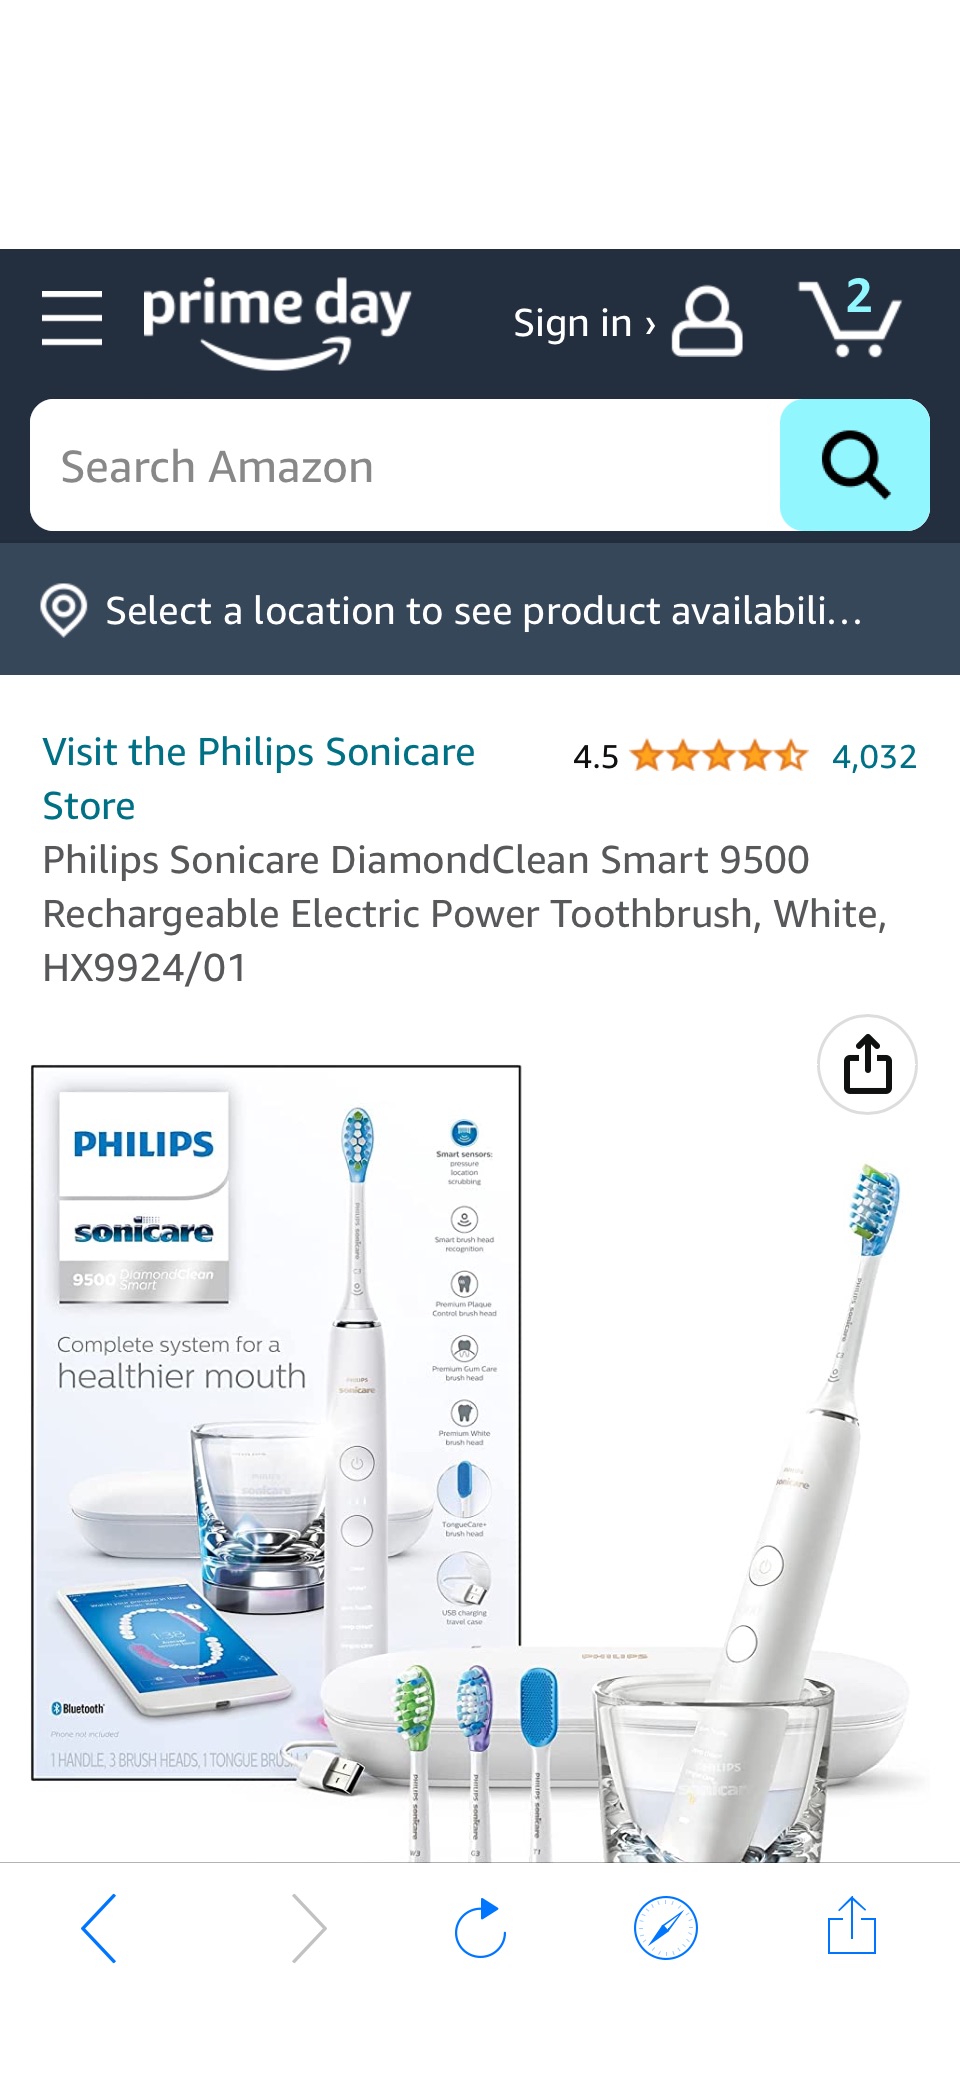 Amazon.com: Philips Sonicare DiamondClean Smart 9500 Rechargeable Electric Power Toothbrush, White, HX9924/01 : Health & Household原价279.95